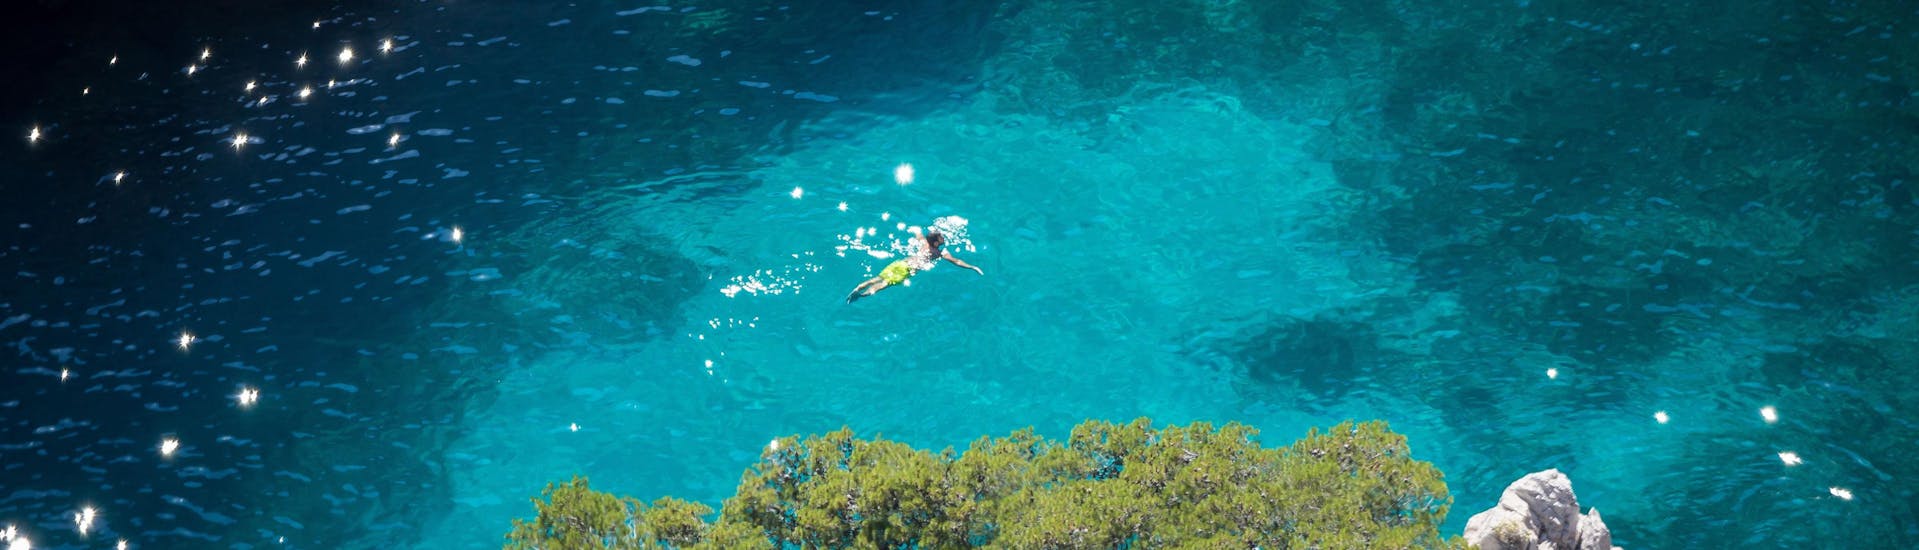 A swimmer is swimming in the turquoise waters of the Calanques National Park, one of the top diving and snorkeling spots on the French Riviera.